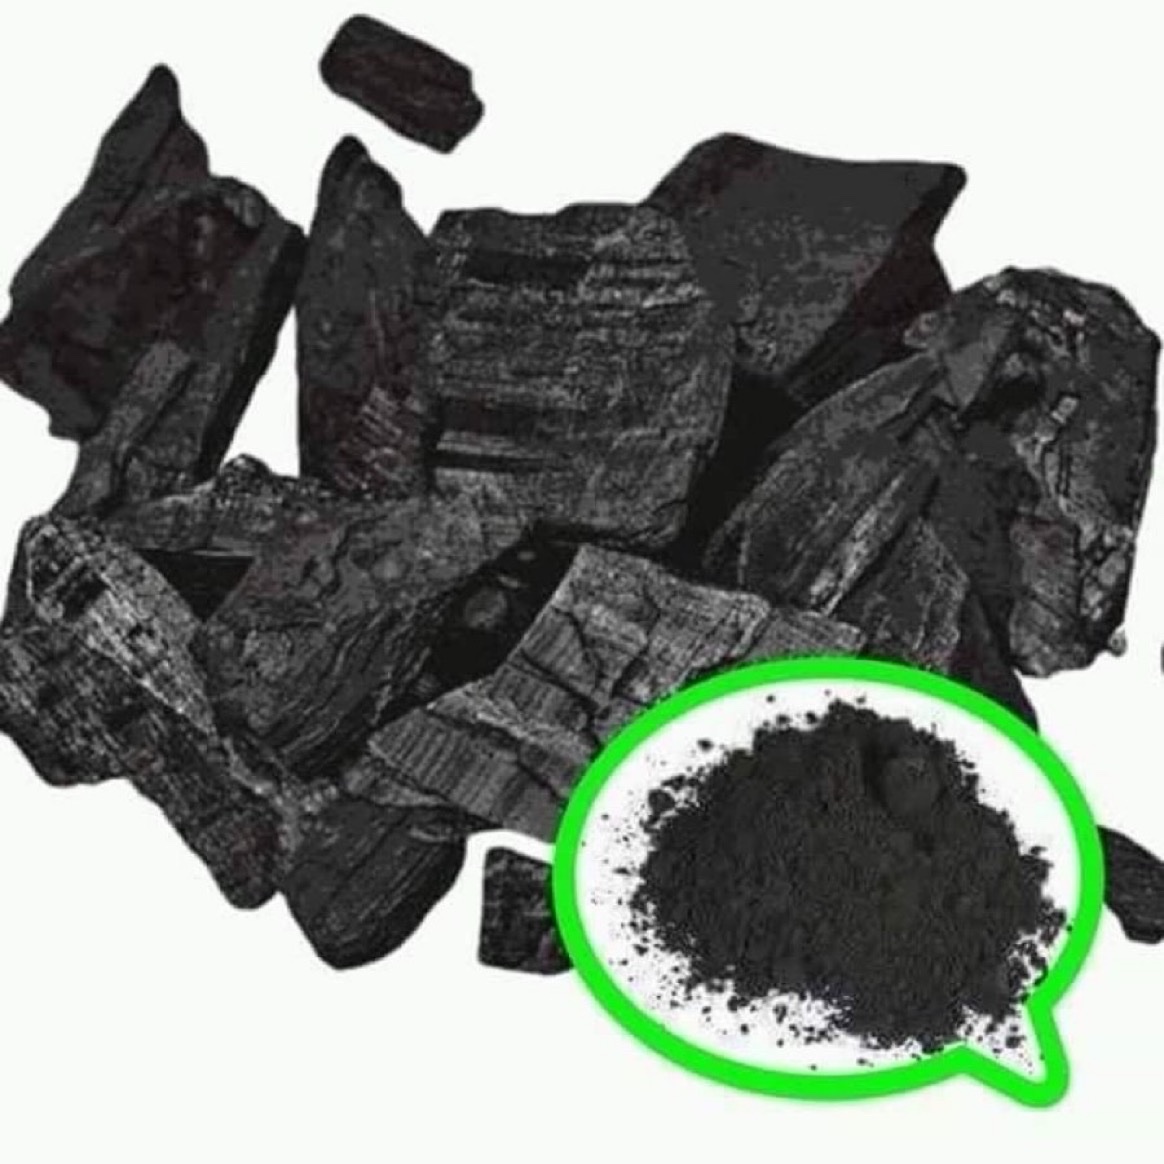 Charcoal has more uses than you know!!! Everyday Amazing uses of charcoal that you didn’t know of !! This thread will blow your mind Open and Read Repost